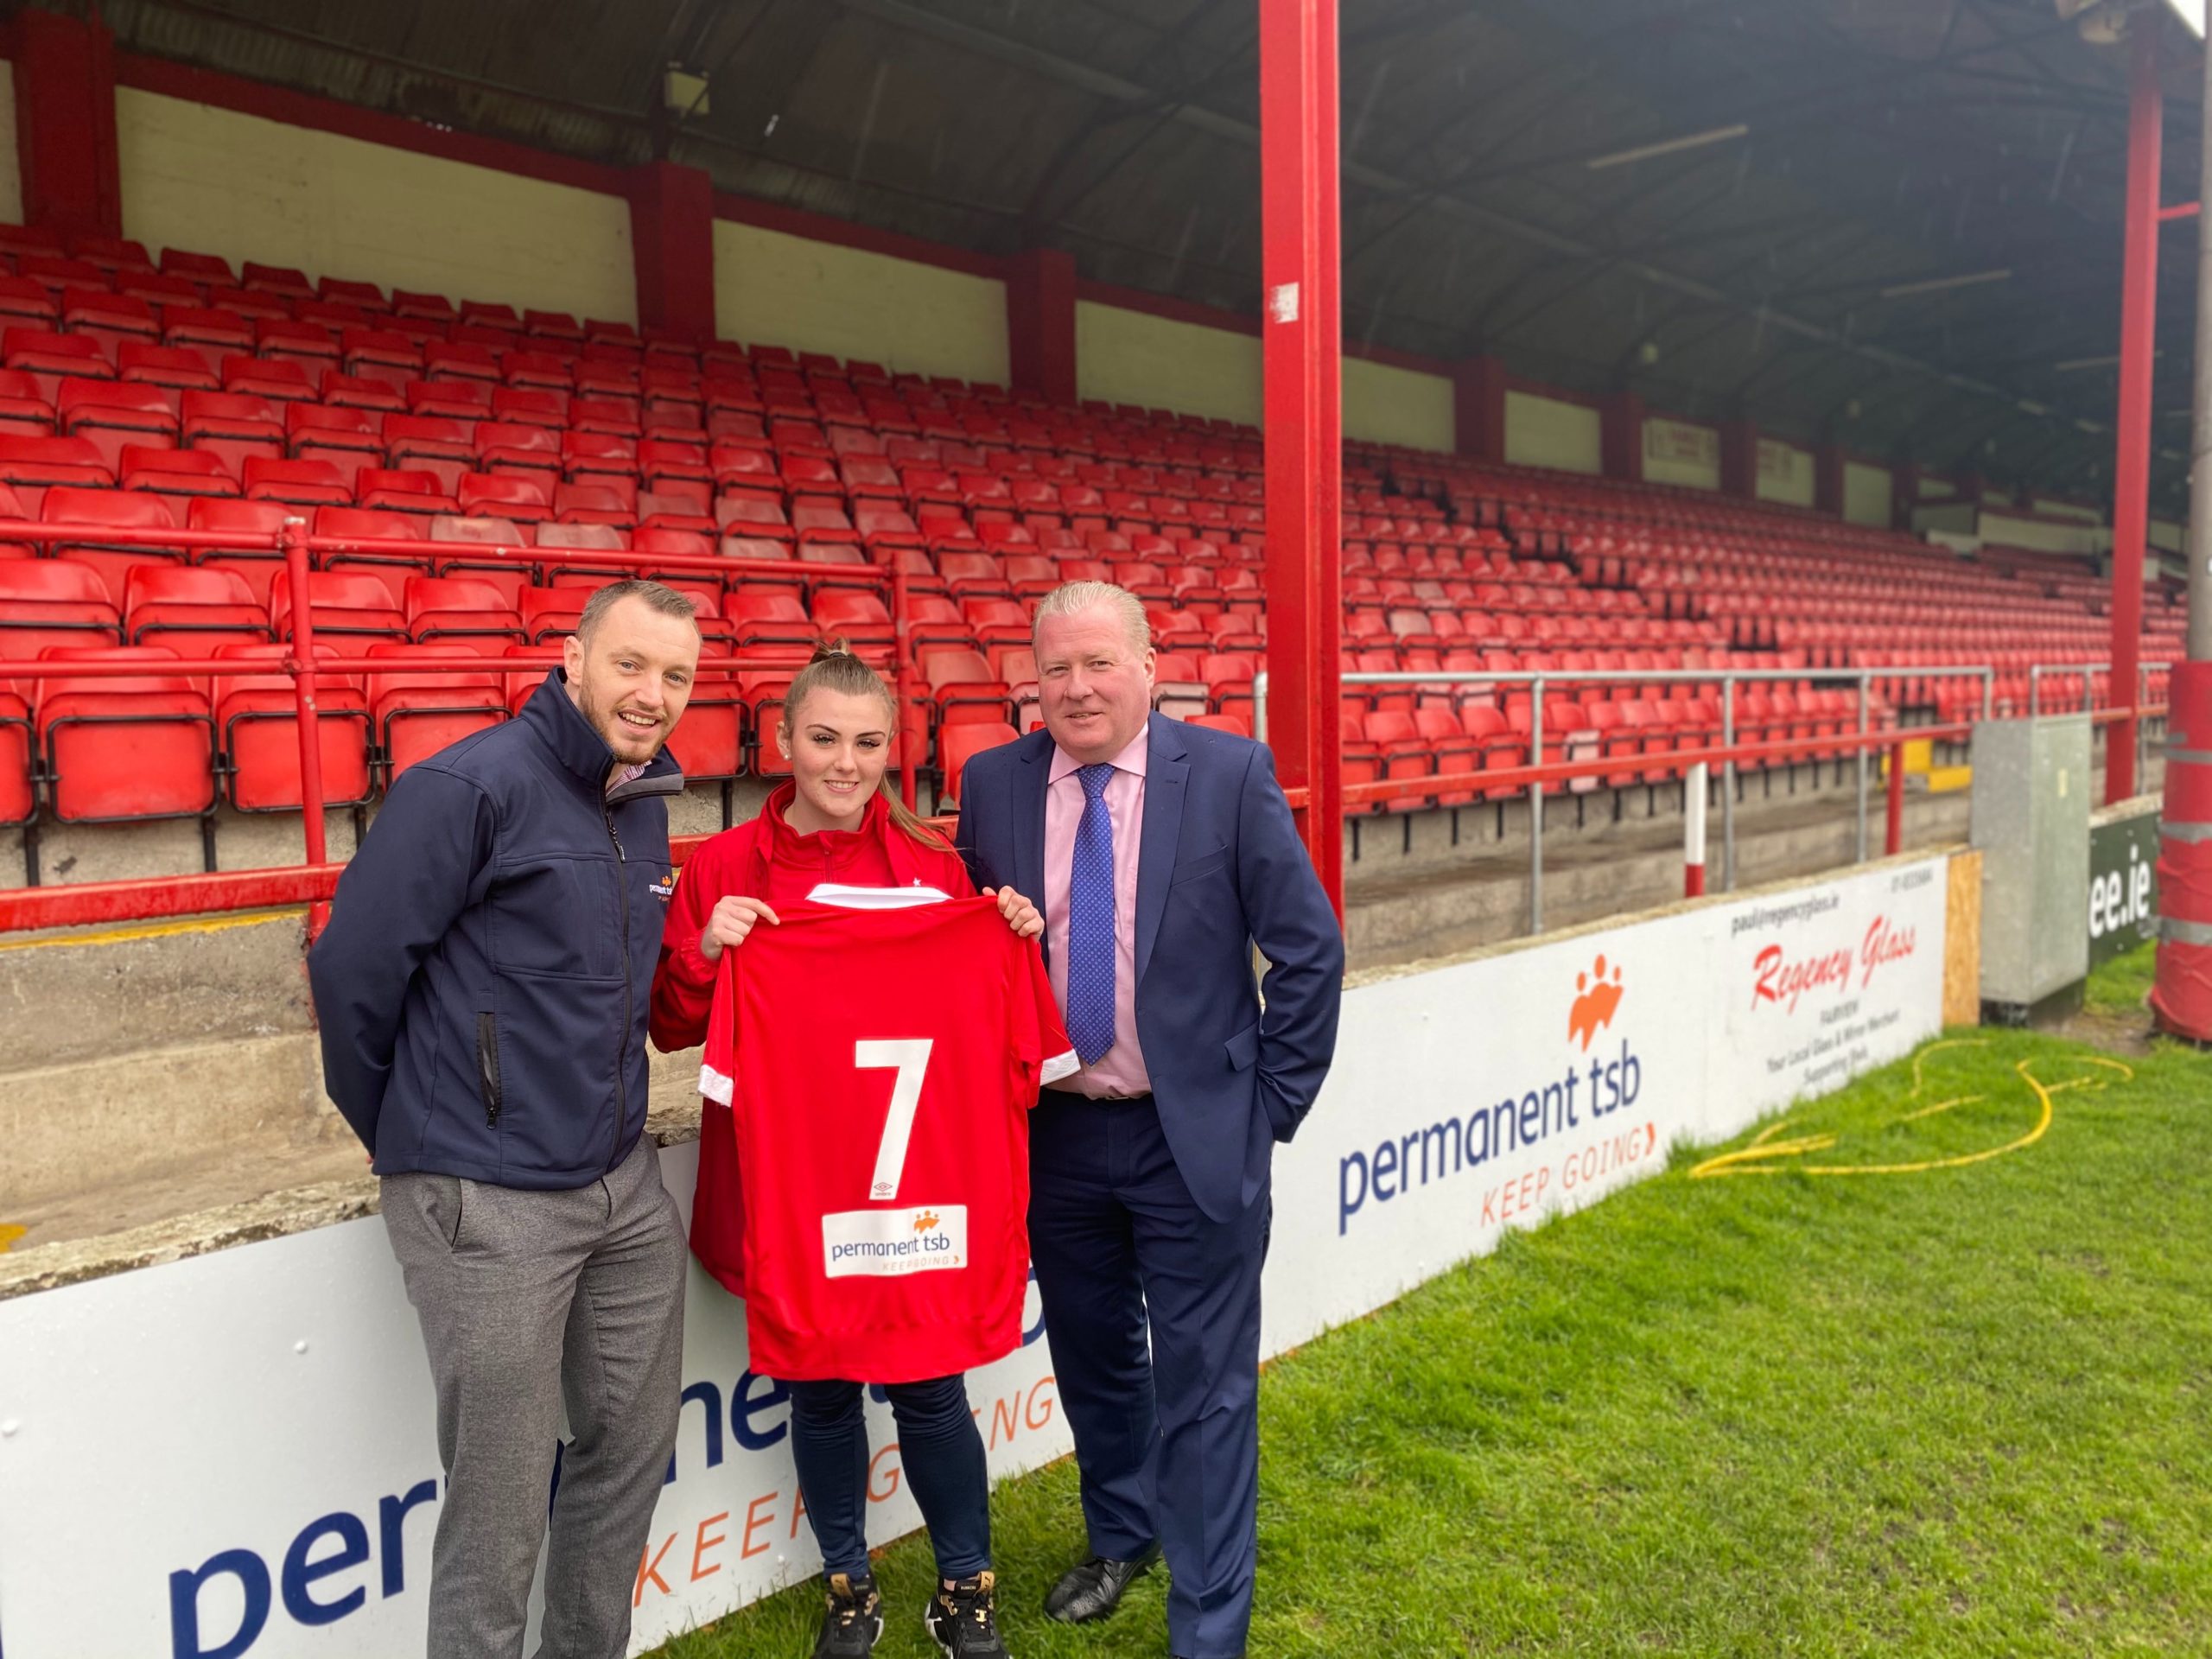 Big boost for WNL teams as Permanent TSB joins team